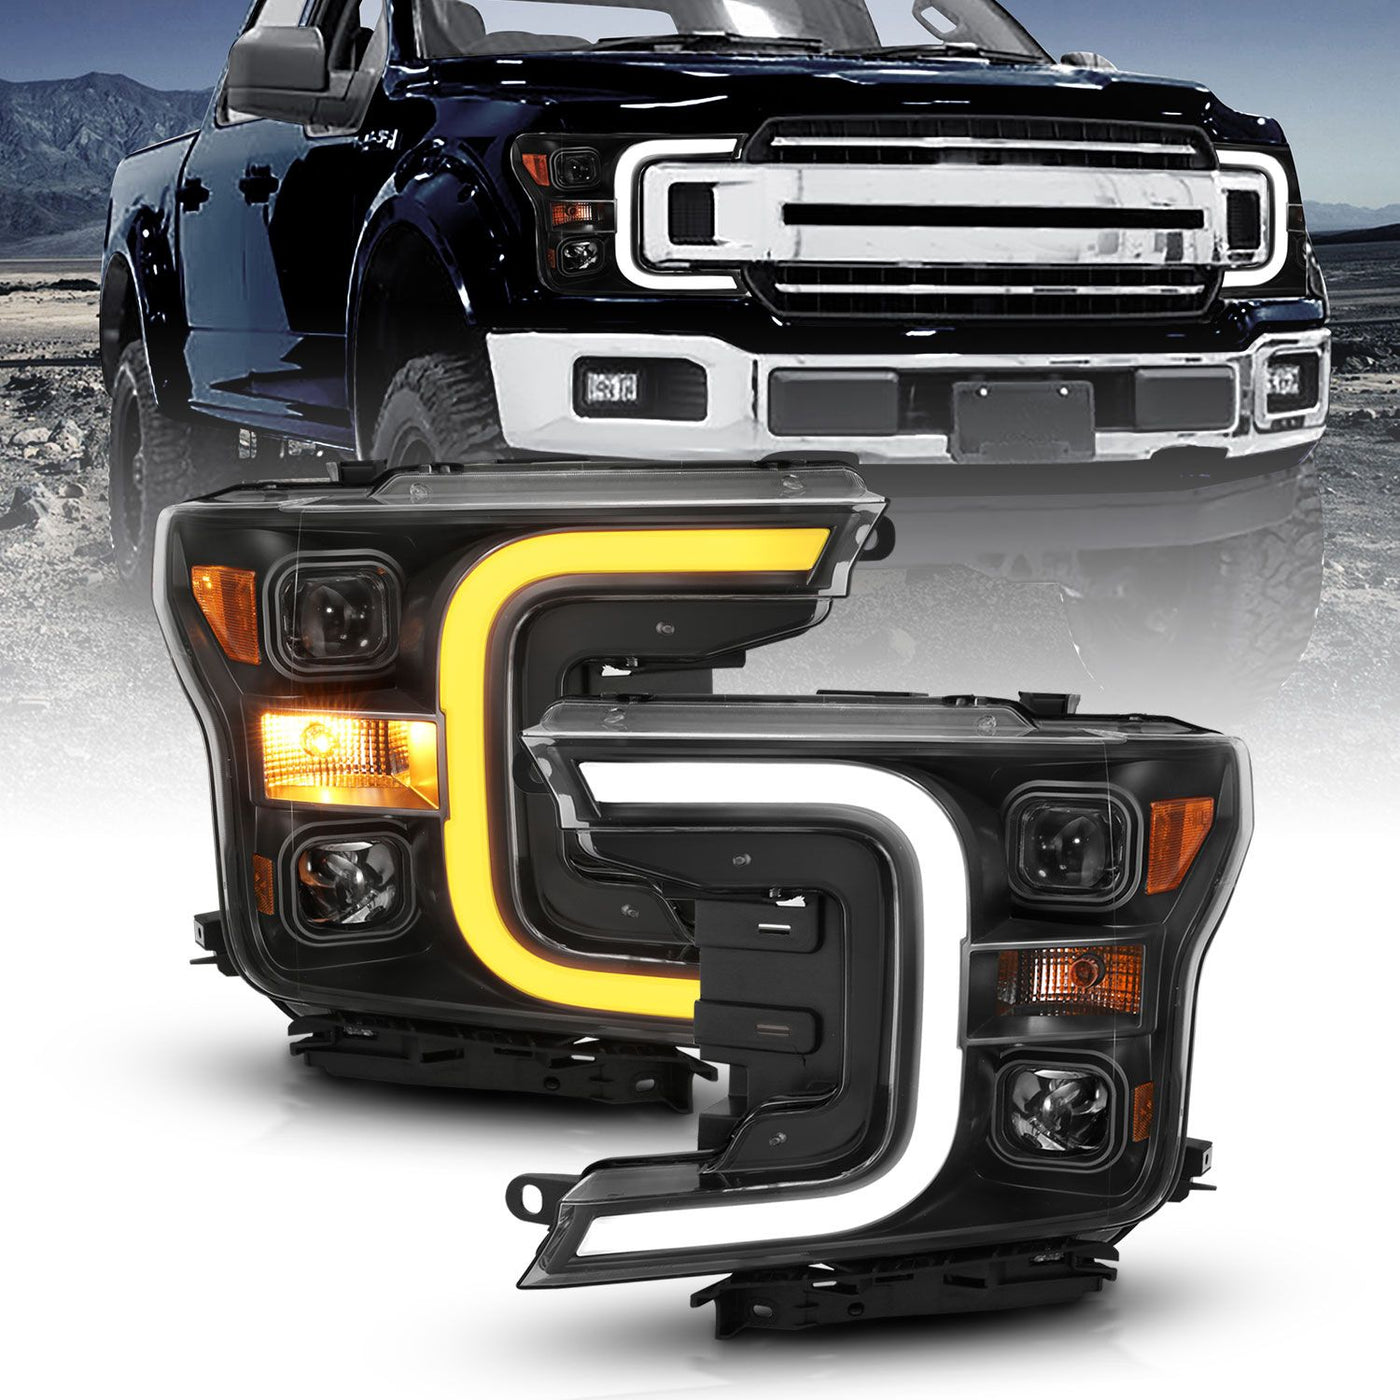  Ford Projector Headlights, Ford F-150 Projector Headlights, Ford 18-20 Projector Headlights, Projector C Bar Style Headlights,  Ford Black Projector Headlights, anzo Projector Headlights